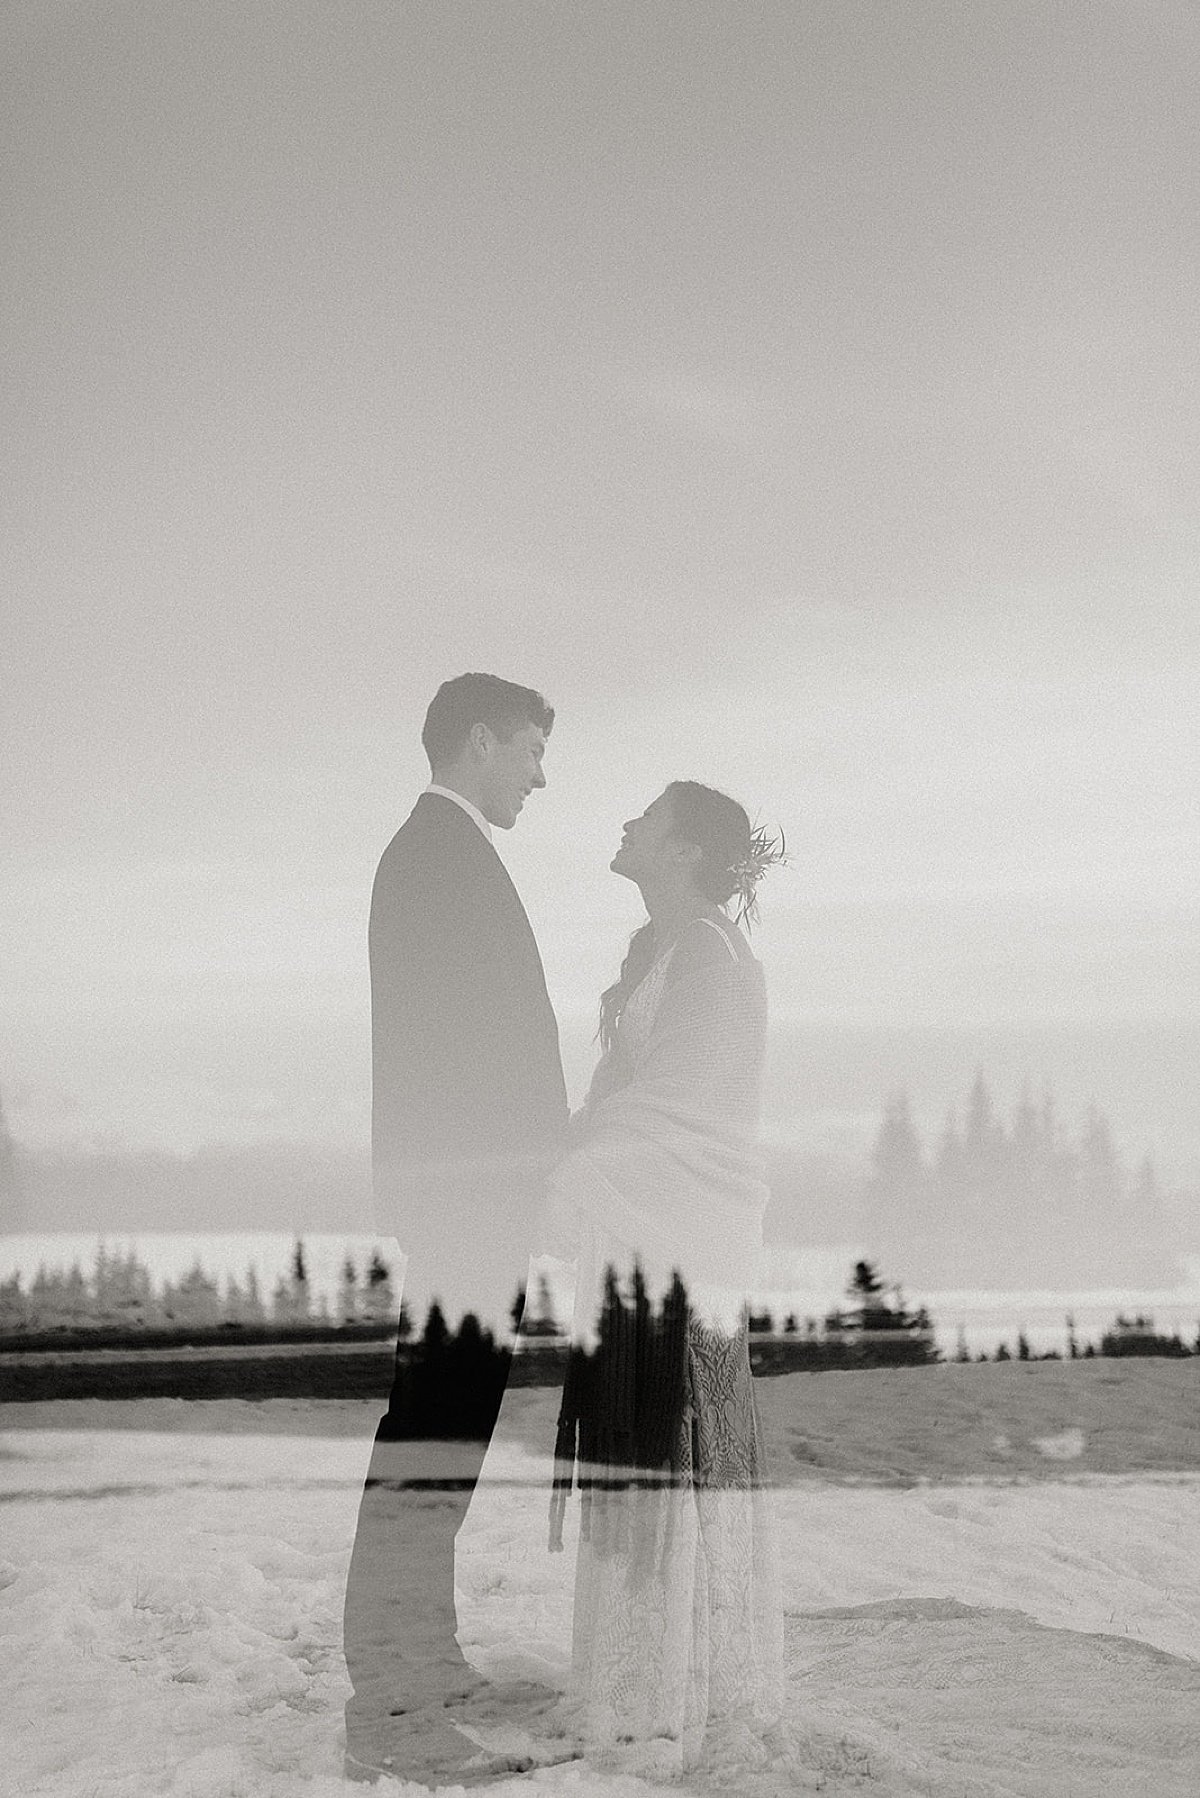  image of bride and groom superimposed on top of pine tree lake view for artsy shoot of snowy fall wedding 